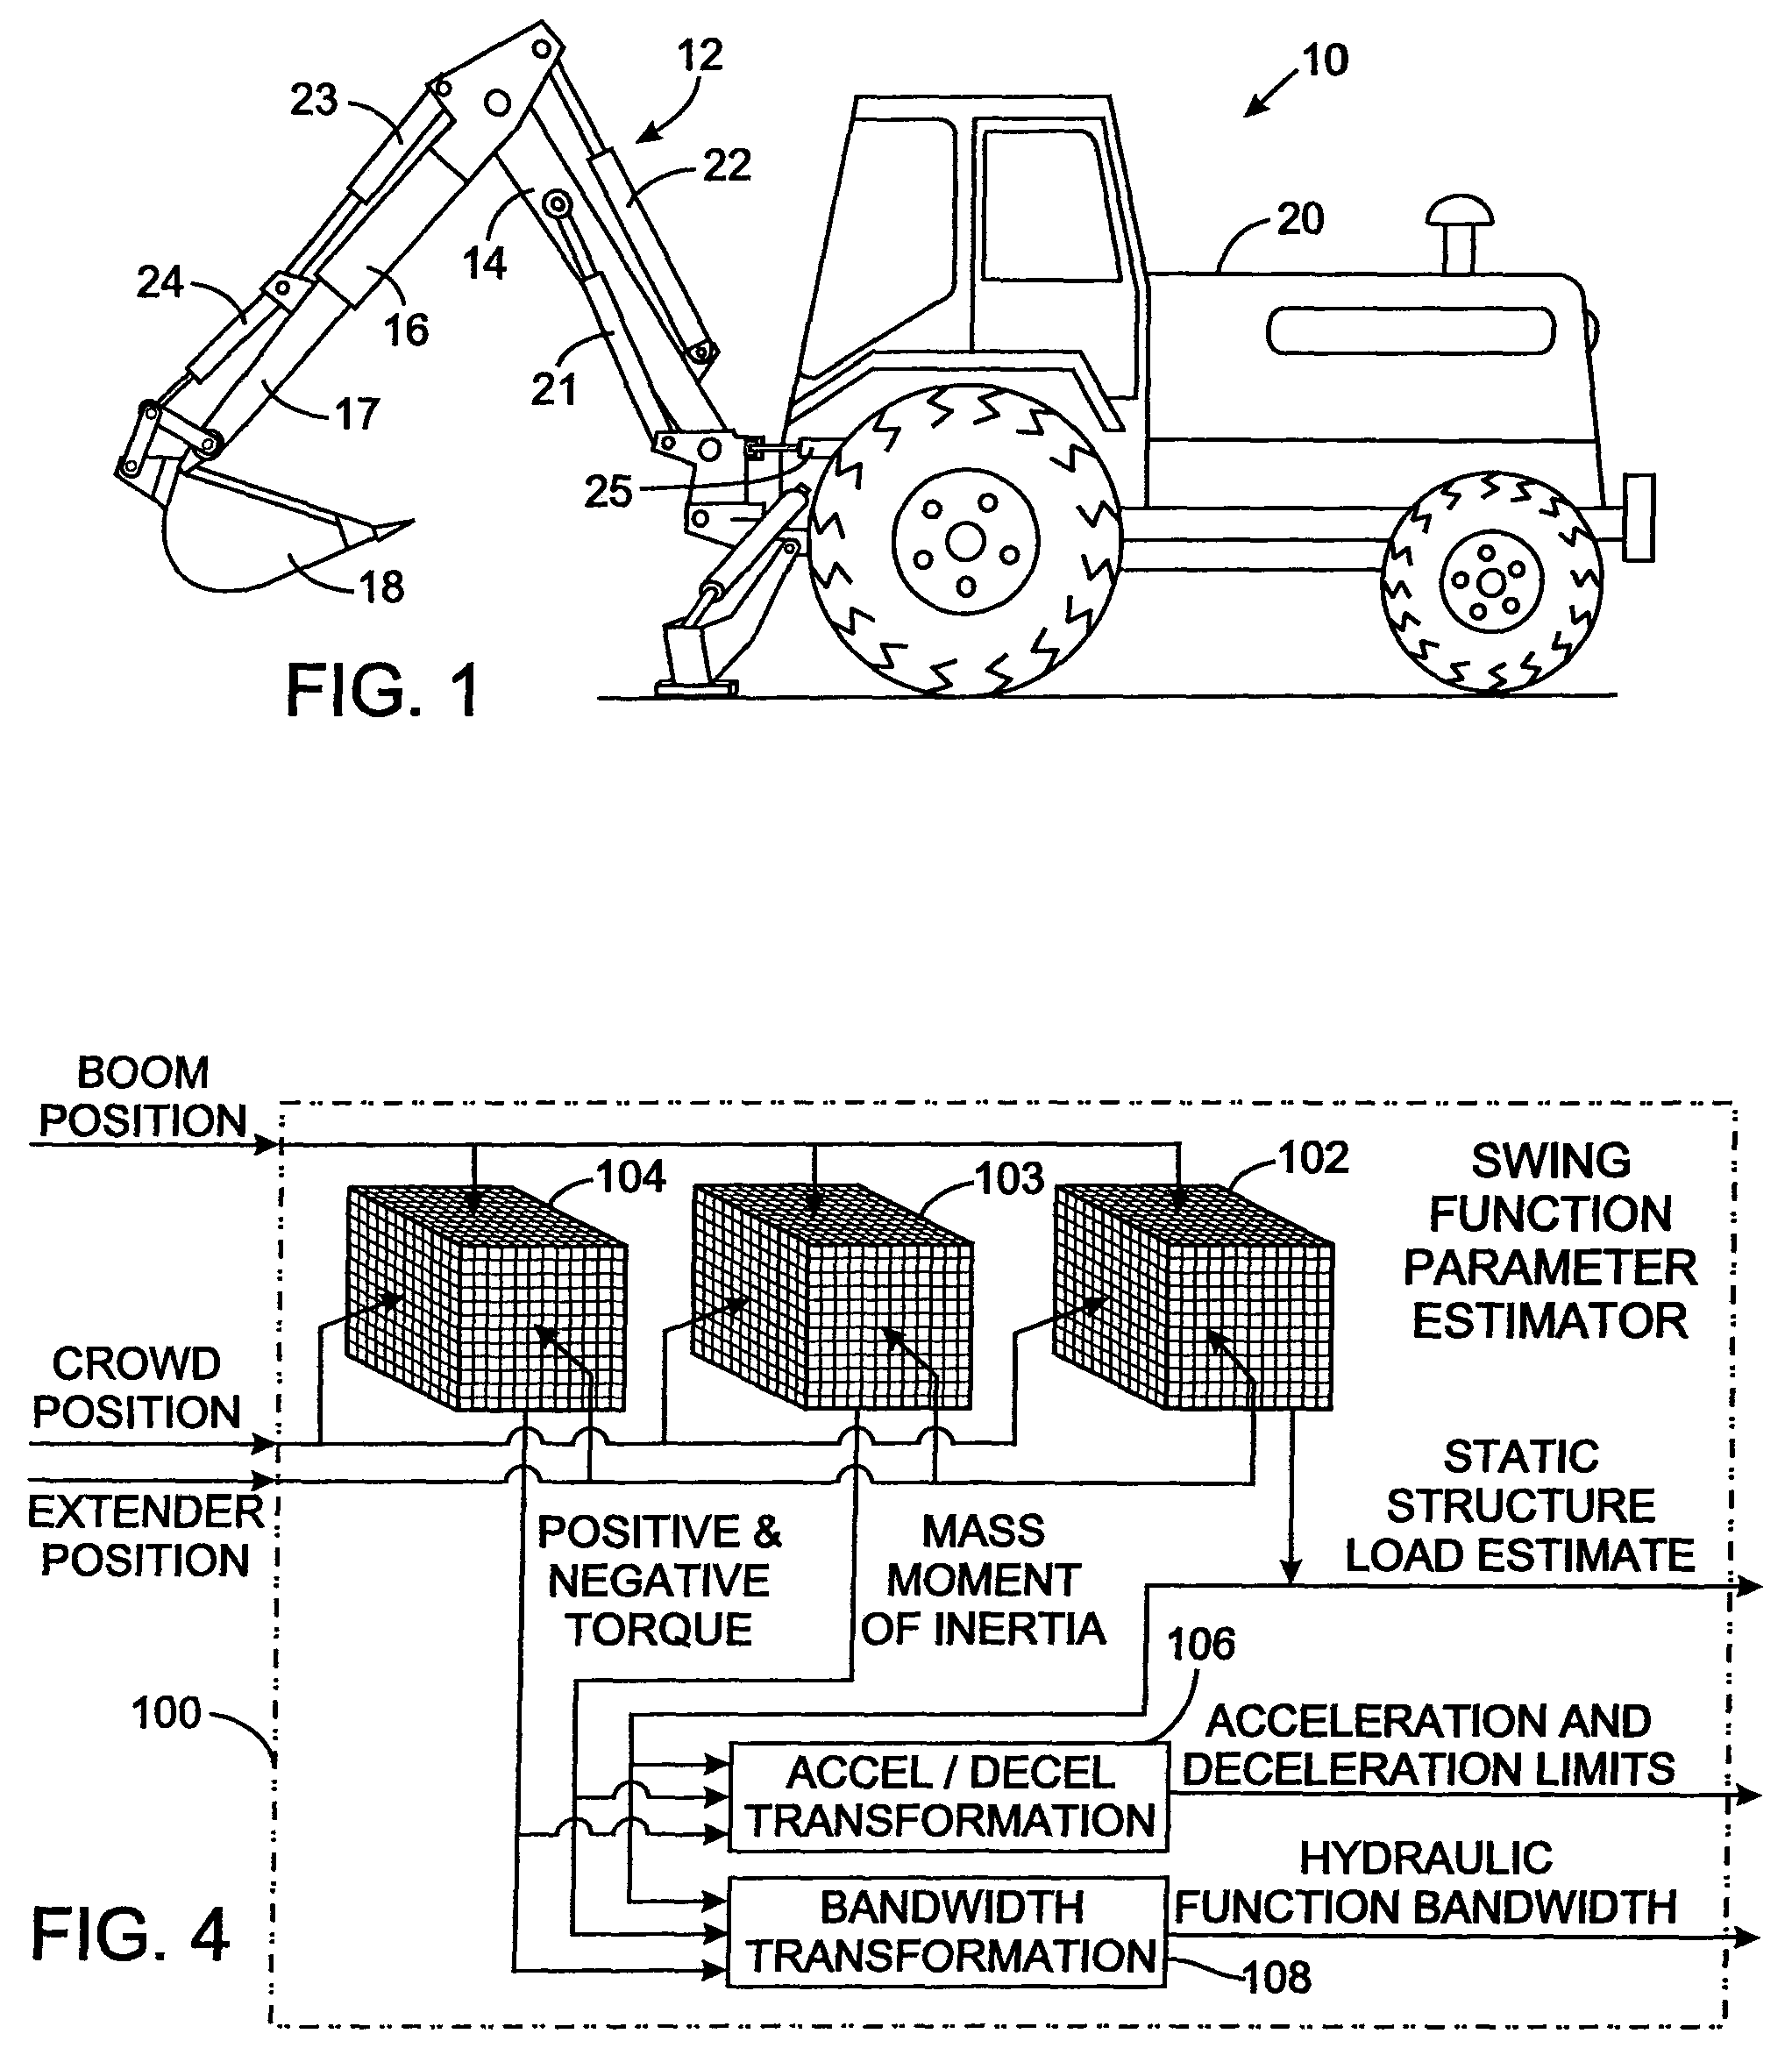 Hydraulic system with compensation for kinematic position changes of machine members